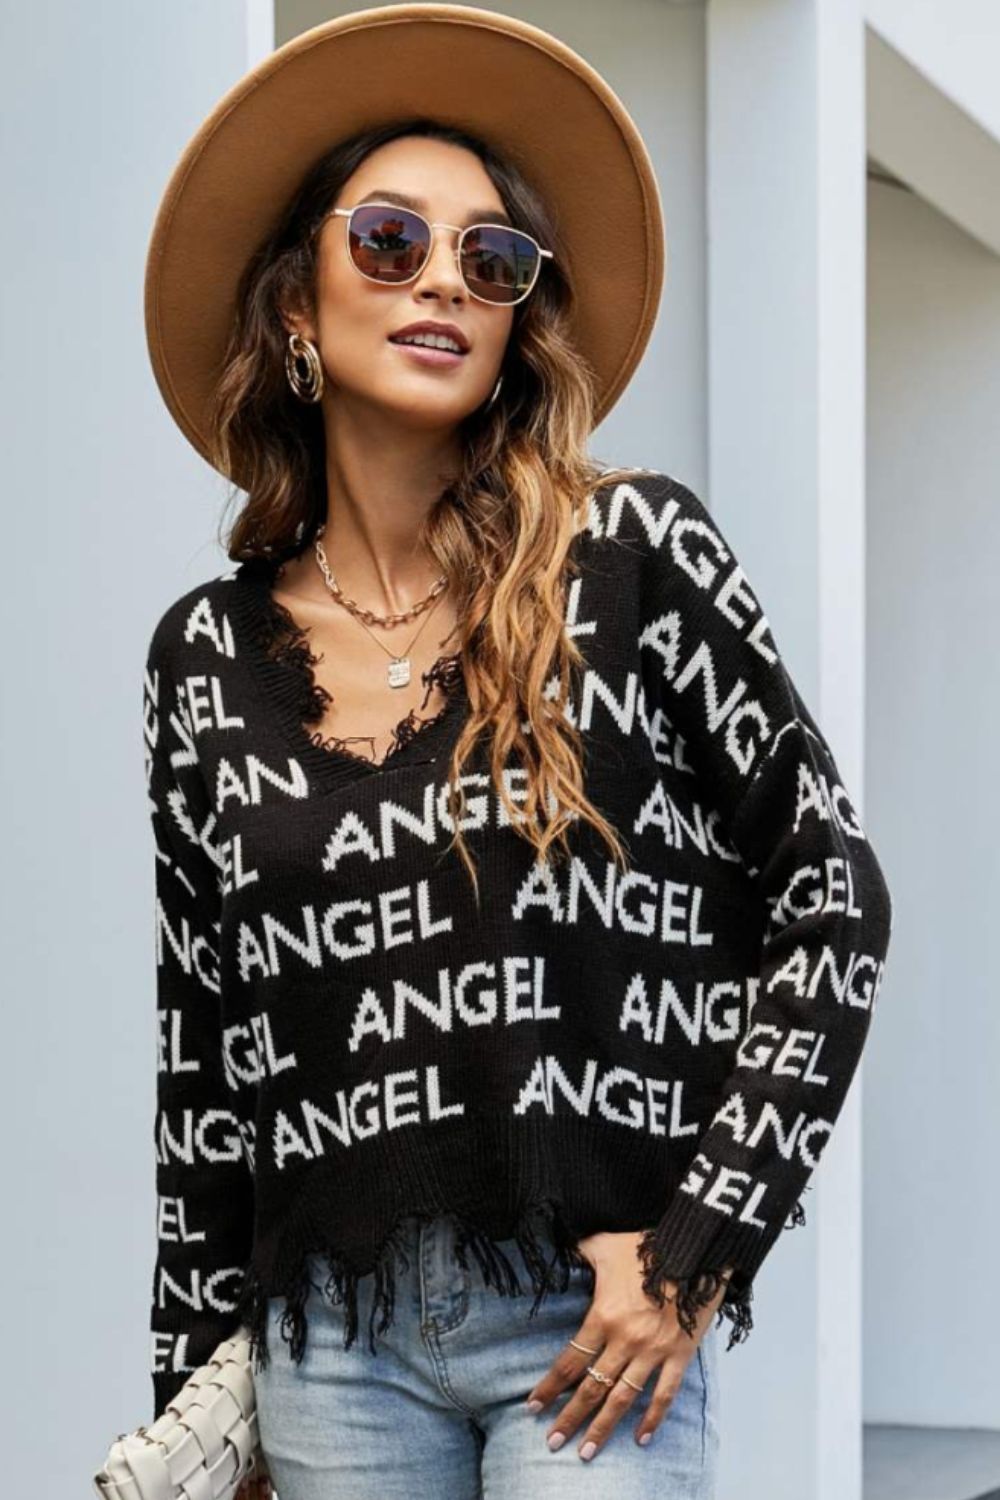 ANGEL Distressed V-Neck Dropped Shoulder Sweater - Apparel & Accessories Girl Code